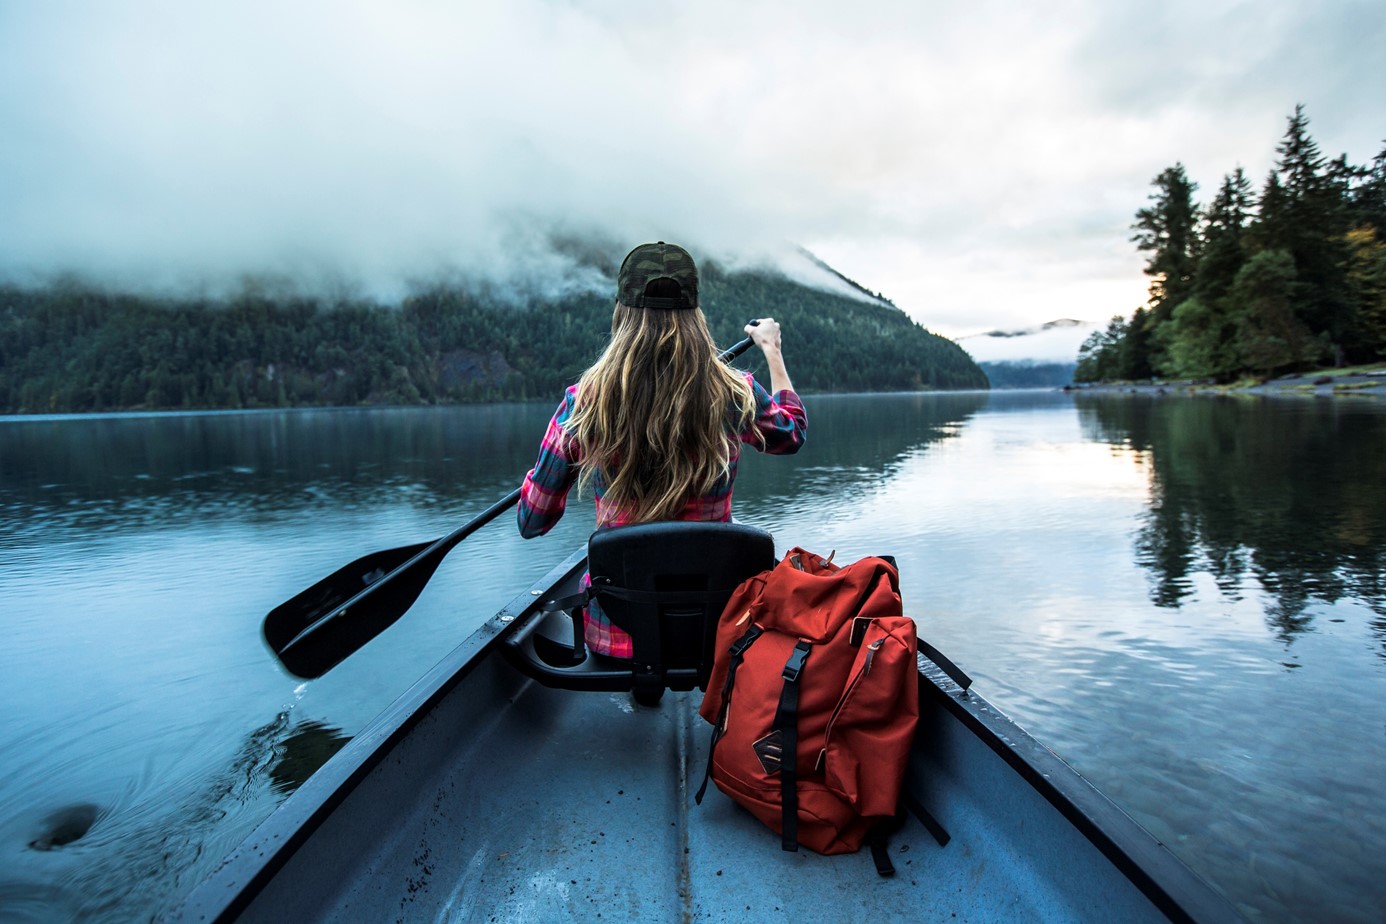 Young woman seen from the back paddles in a canoe on a beatiful lake surrounded by forested hills and low lying mist. A red back pack is seen in the canoe.